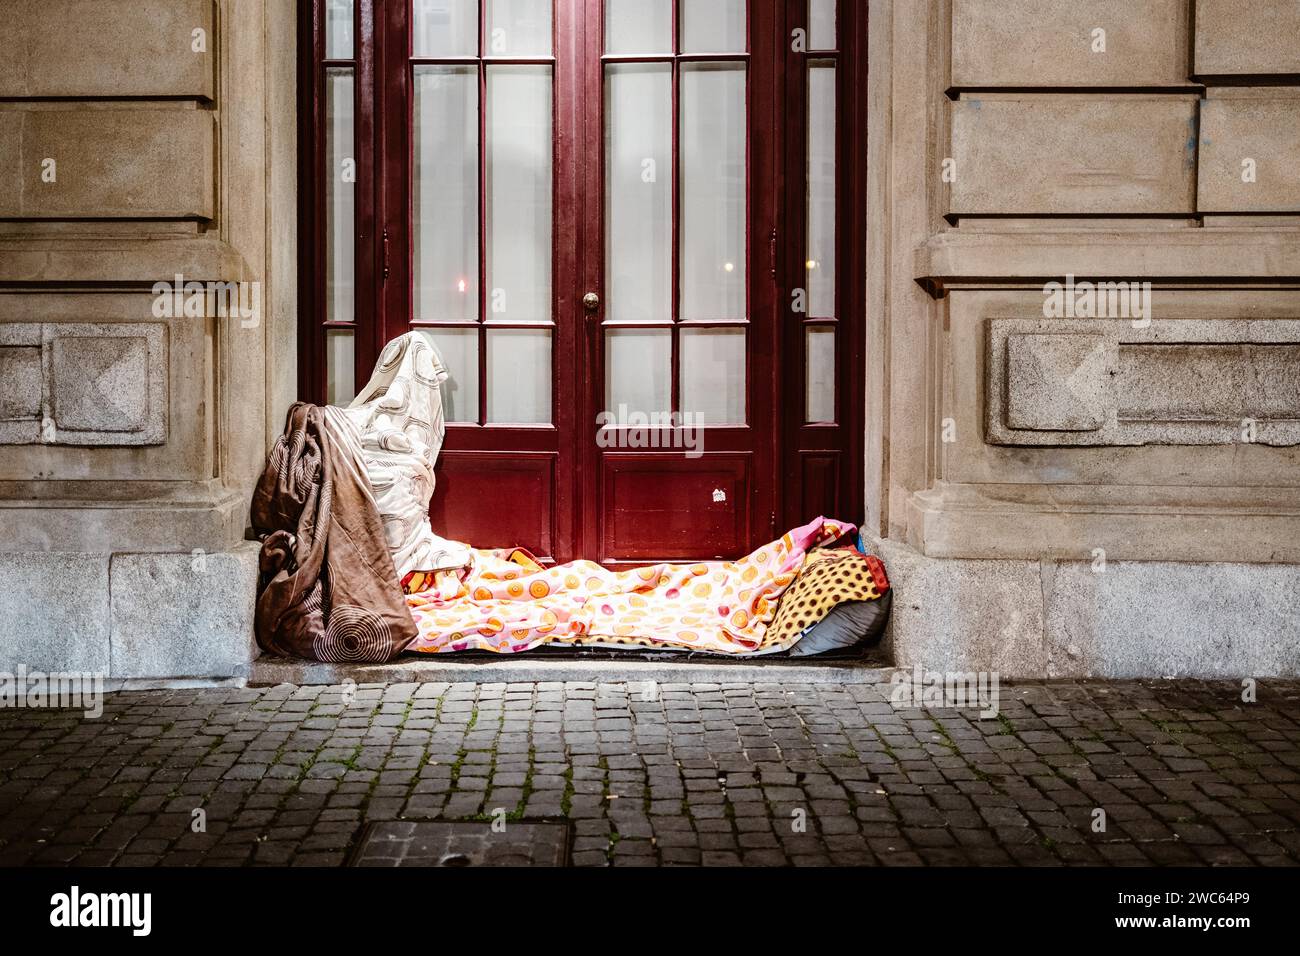 Illuminated bed of homeless person in front of urban house, Porto, Portugal Stock Photo